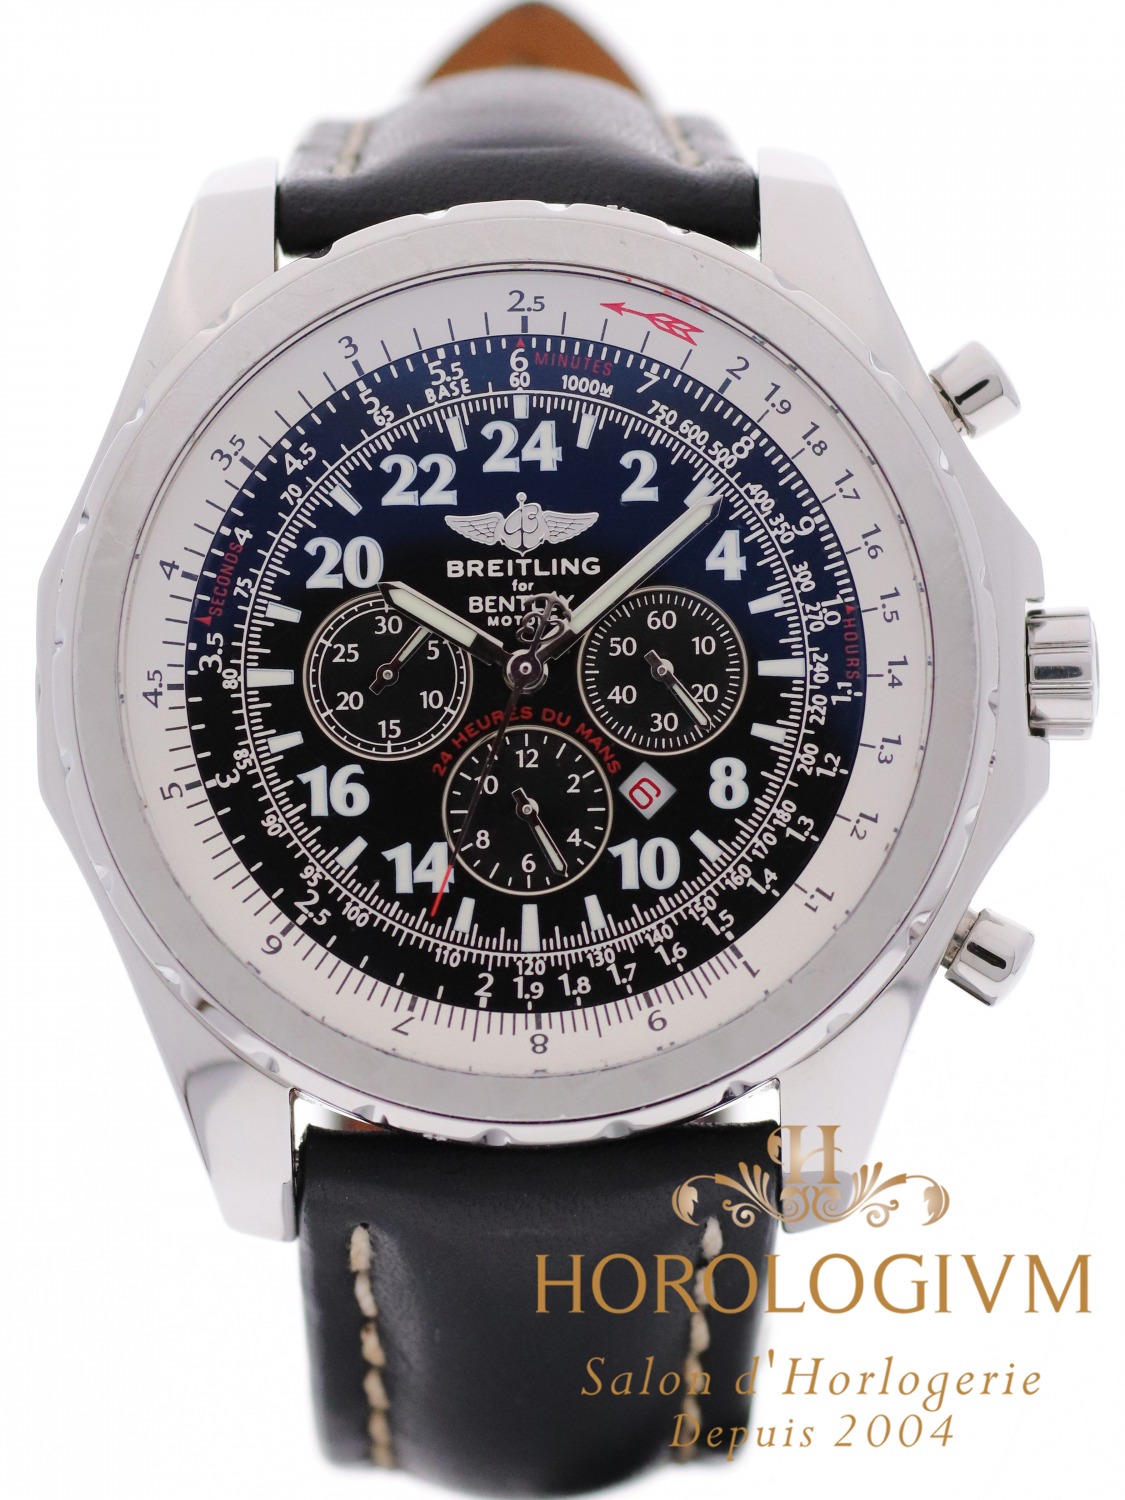 Breitling Bentley Le Mans 24 hr Limited Edition 1000 pcs watch, silver